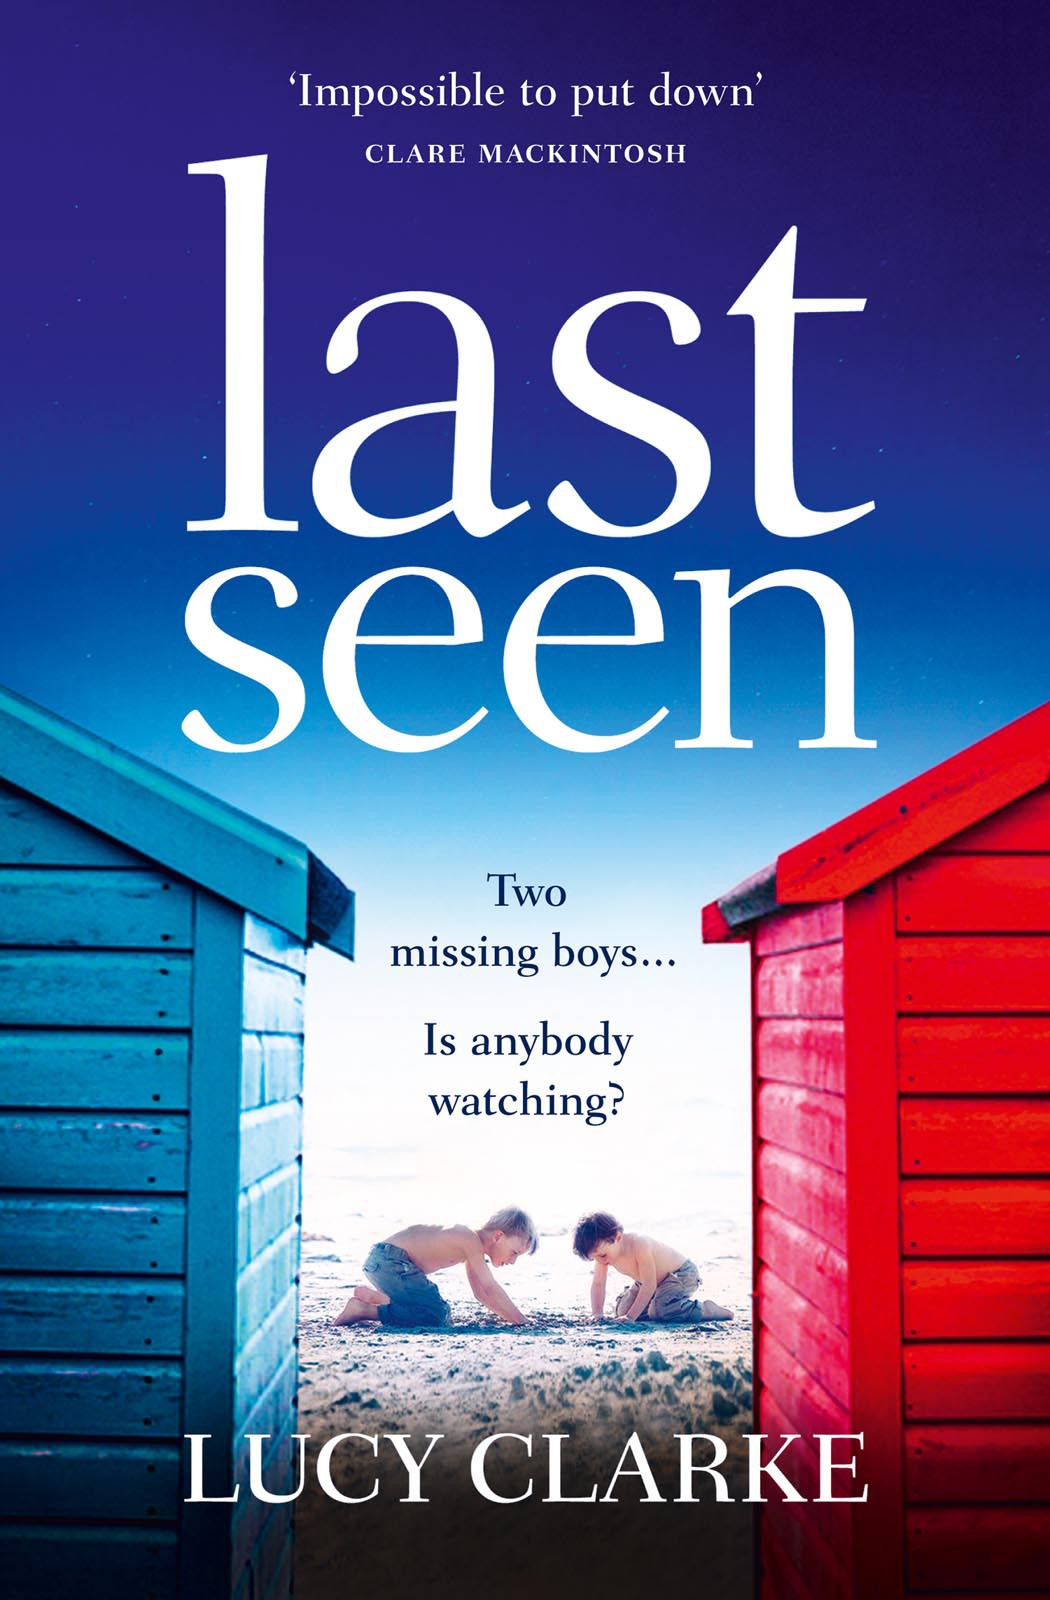 Last Seen: A gripping psychological thriller, full of secrets and twists